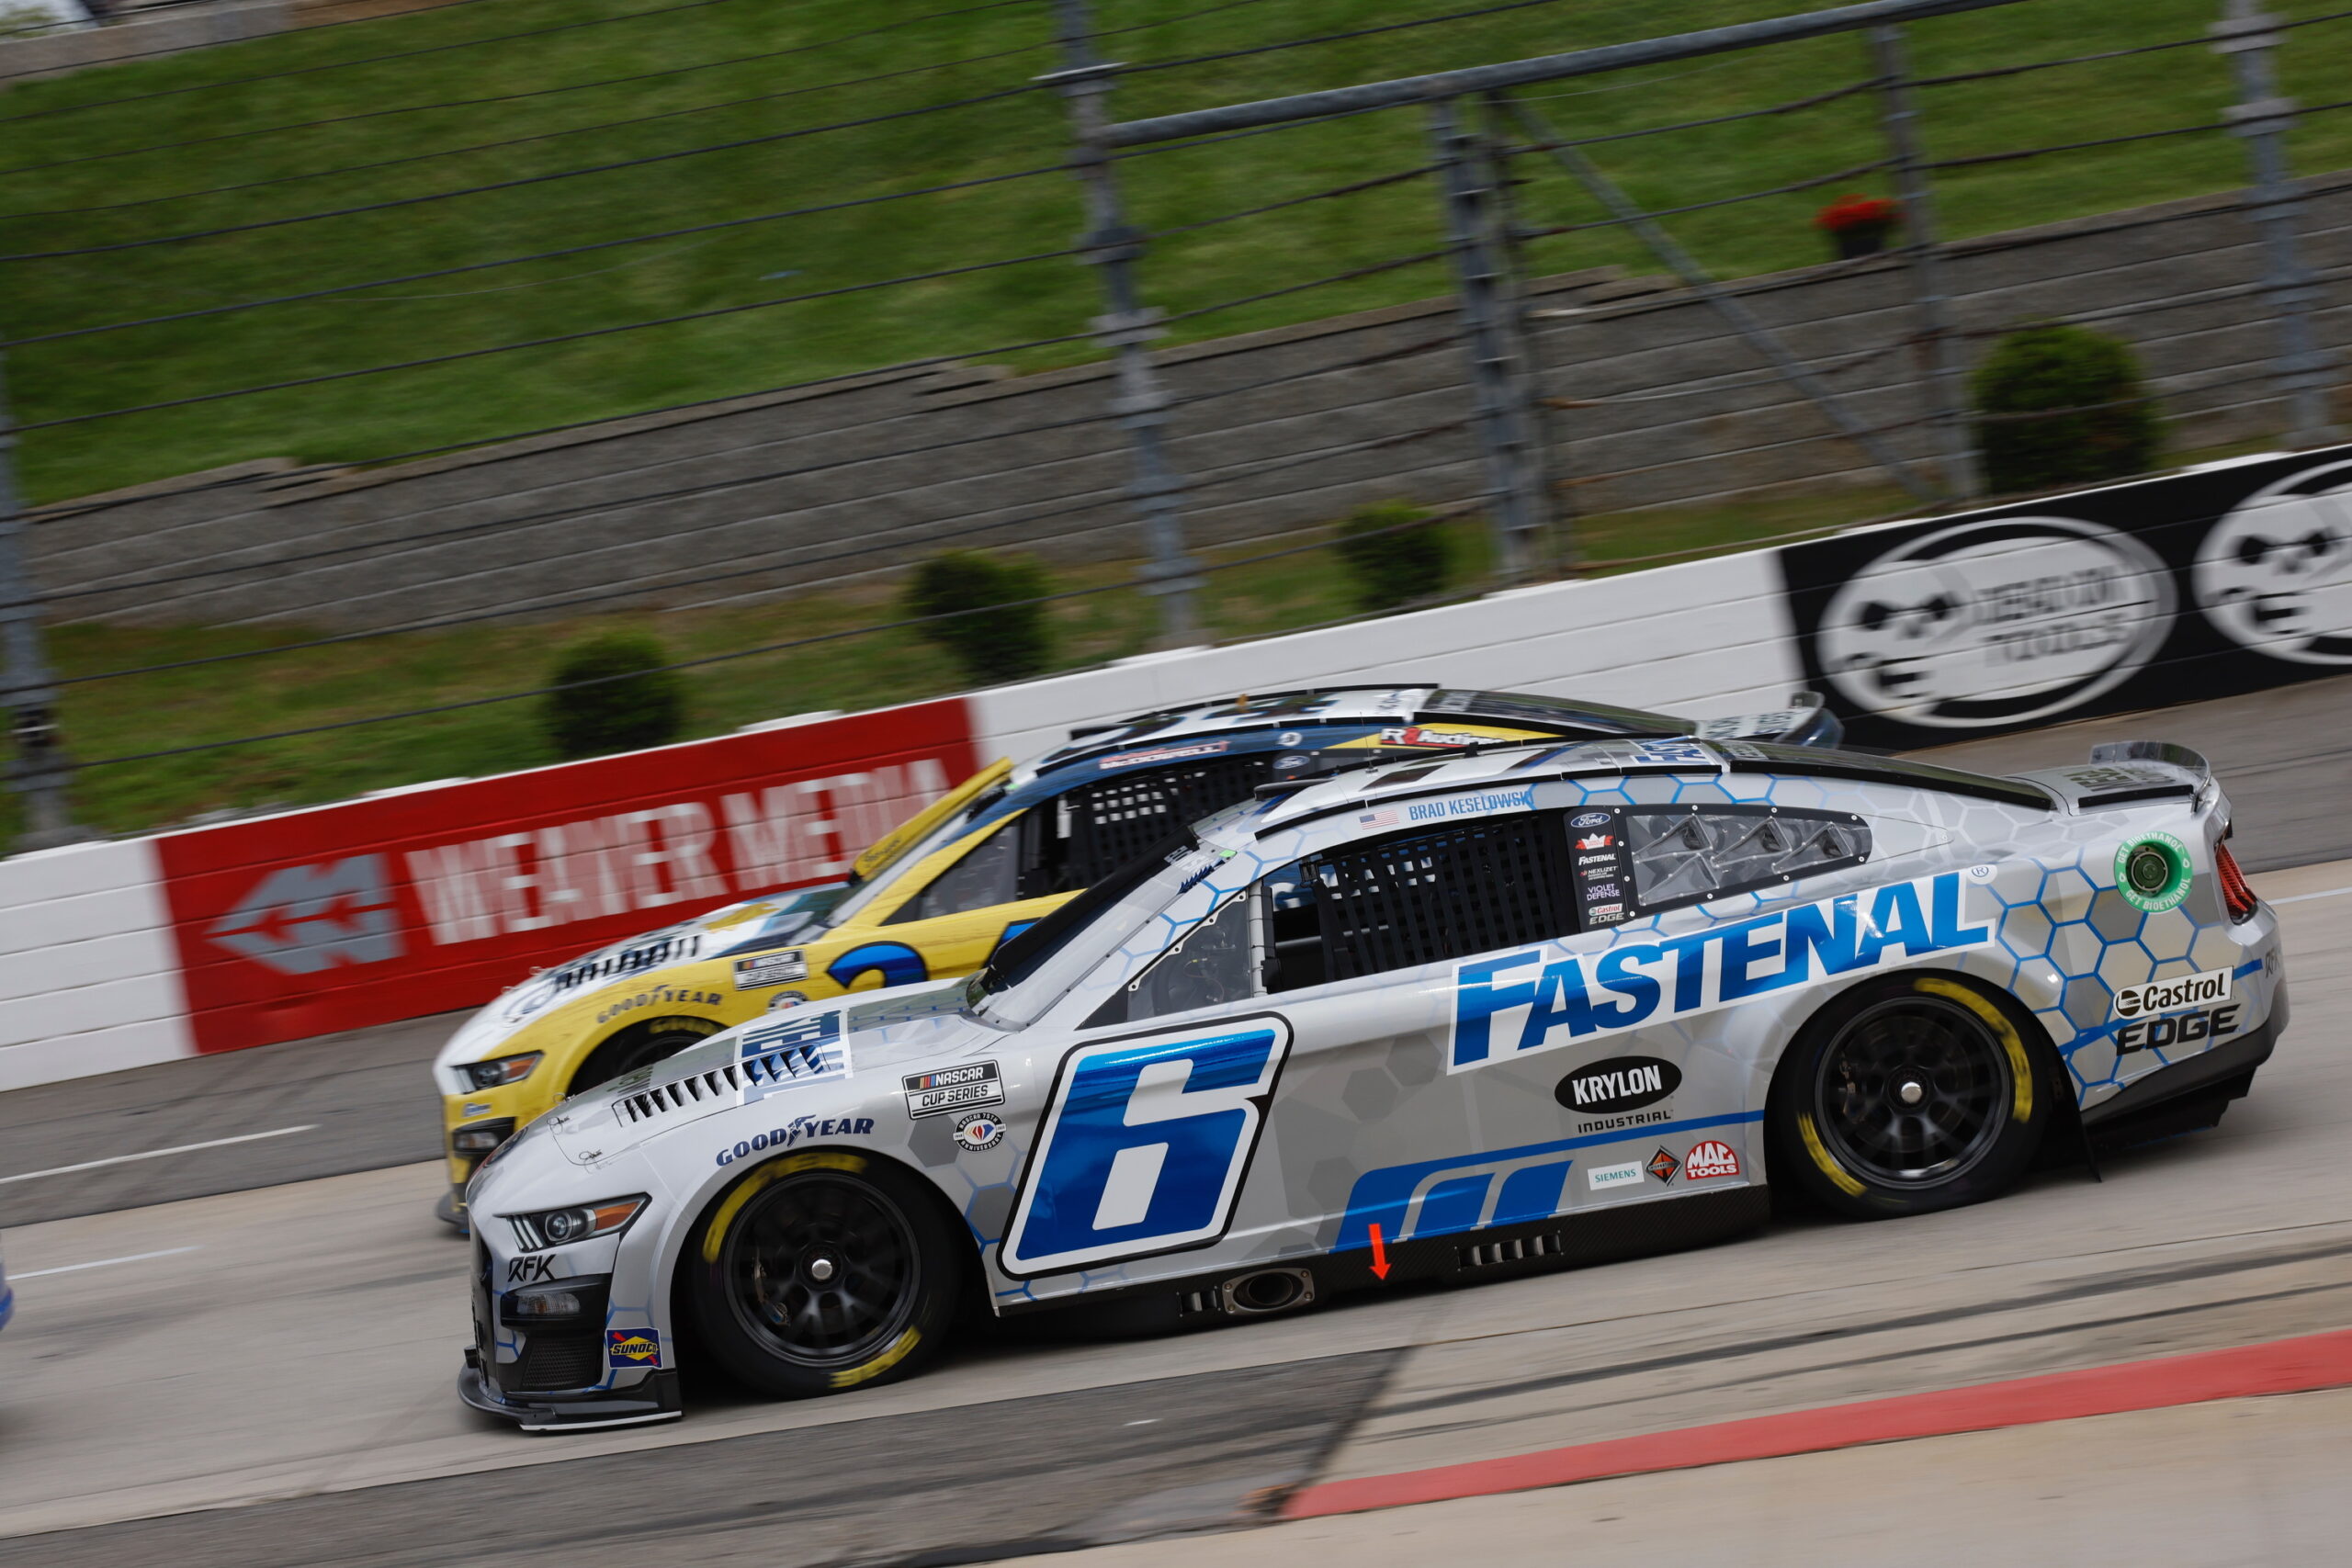 Late Caution Untimely for Keselowski at Martinsville